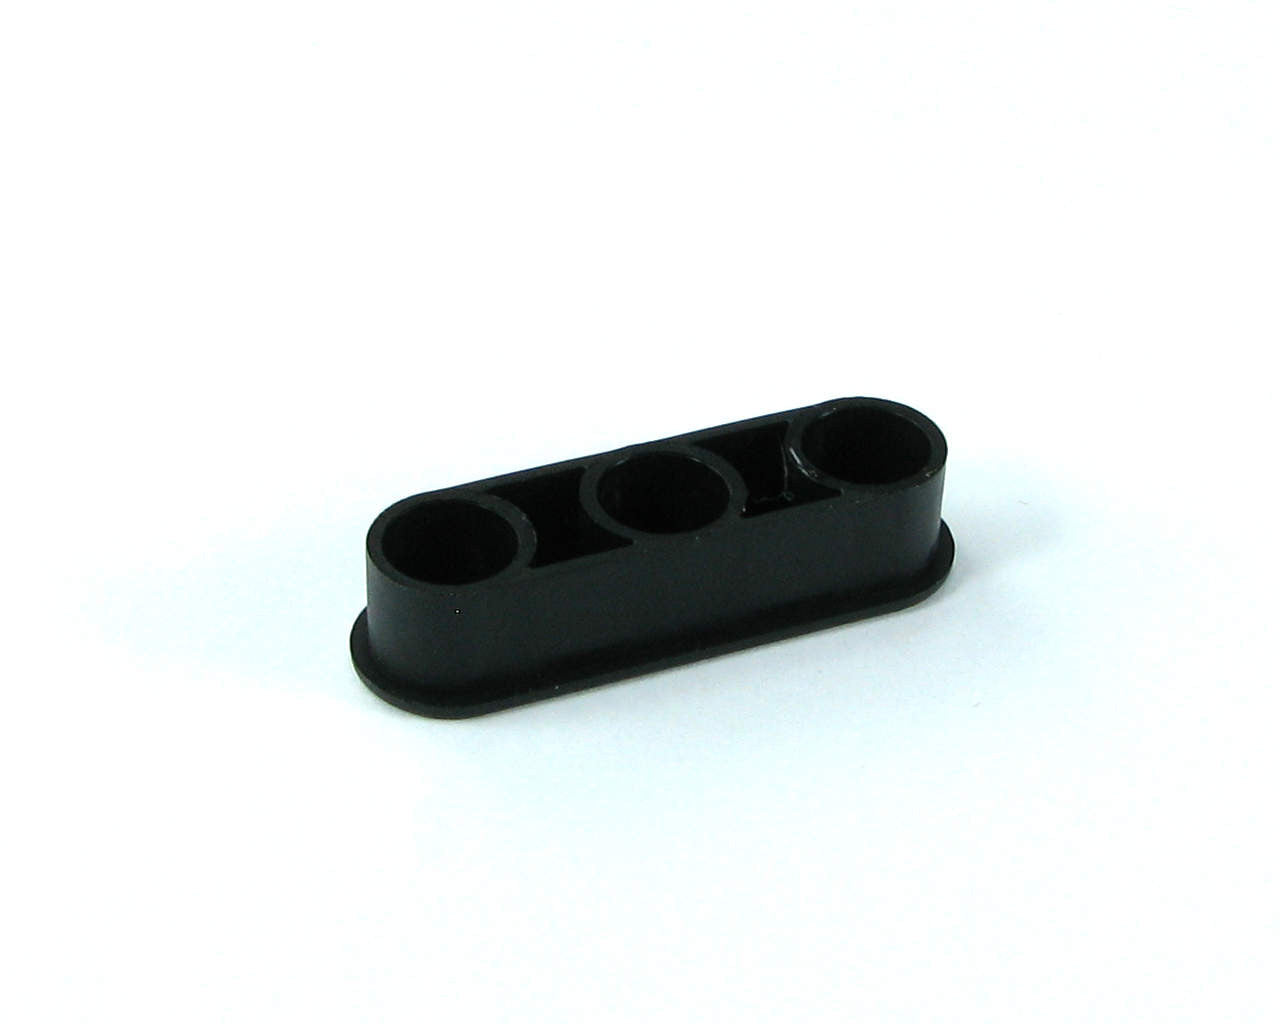 PrimoChill Component Video / Audio Port Dust Cover - Black - 10 Pack - PrimoChill - KEEPING IT COOL